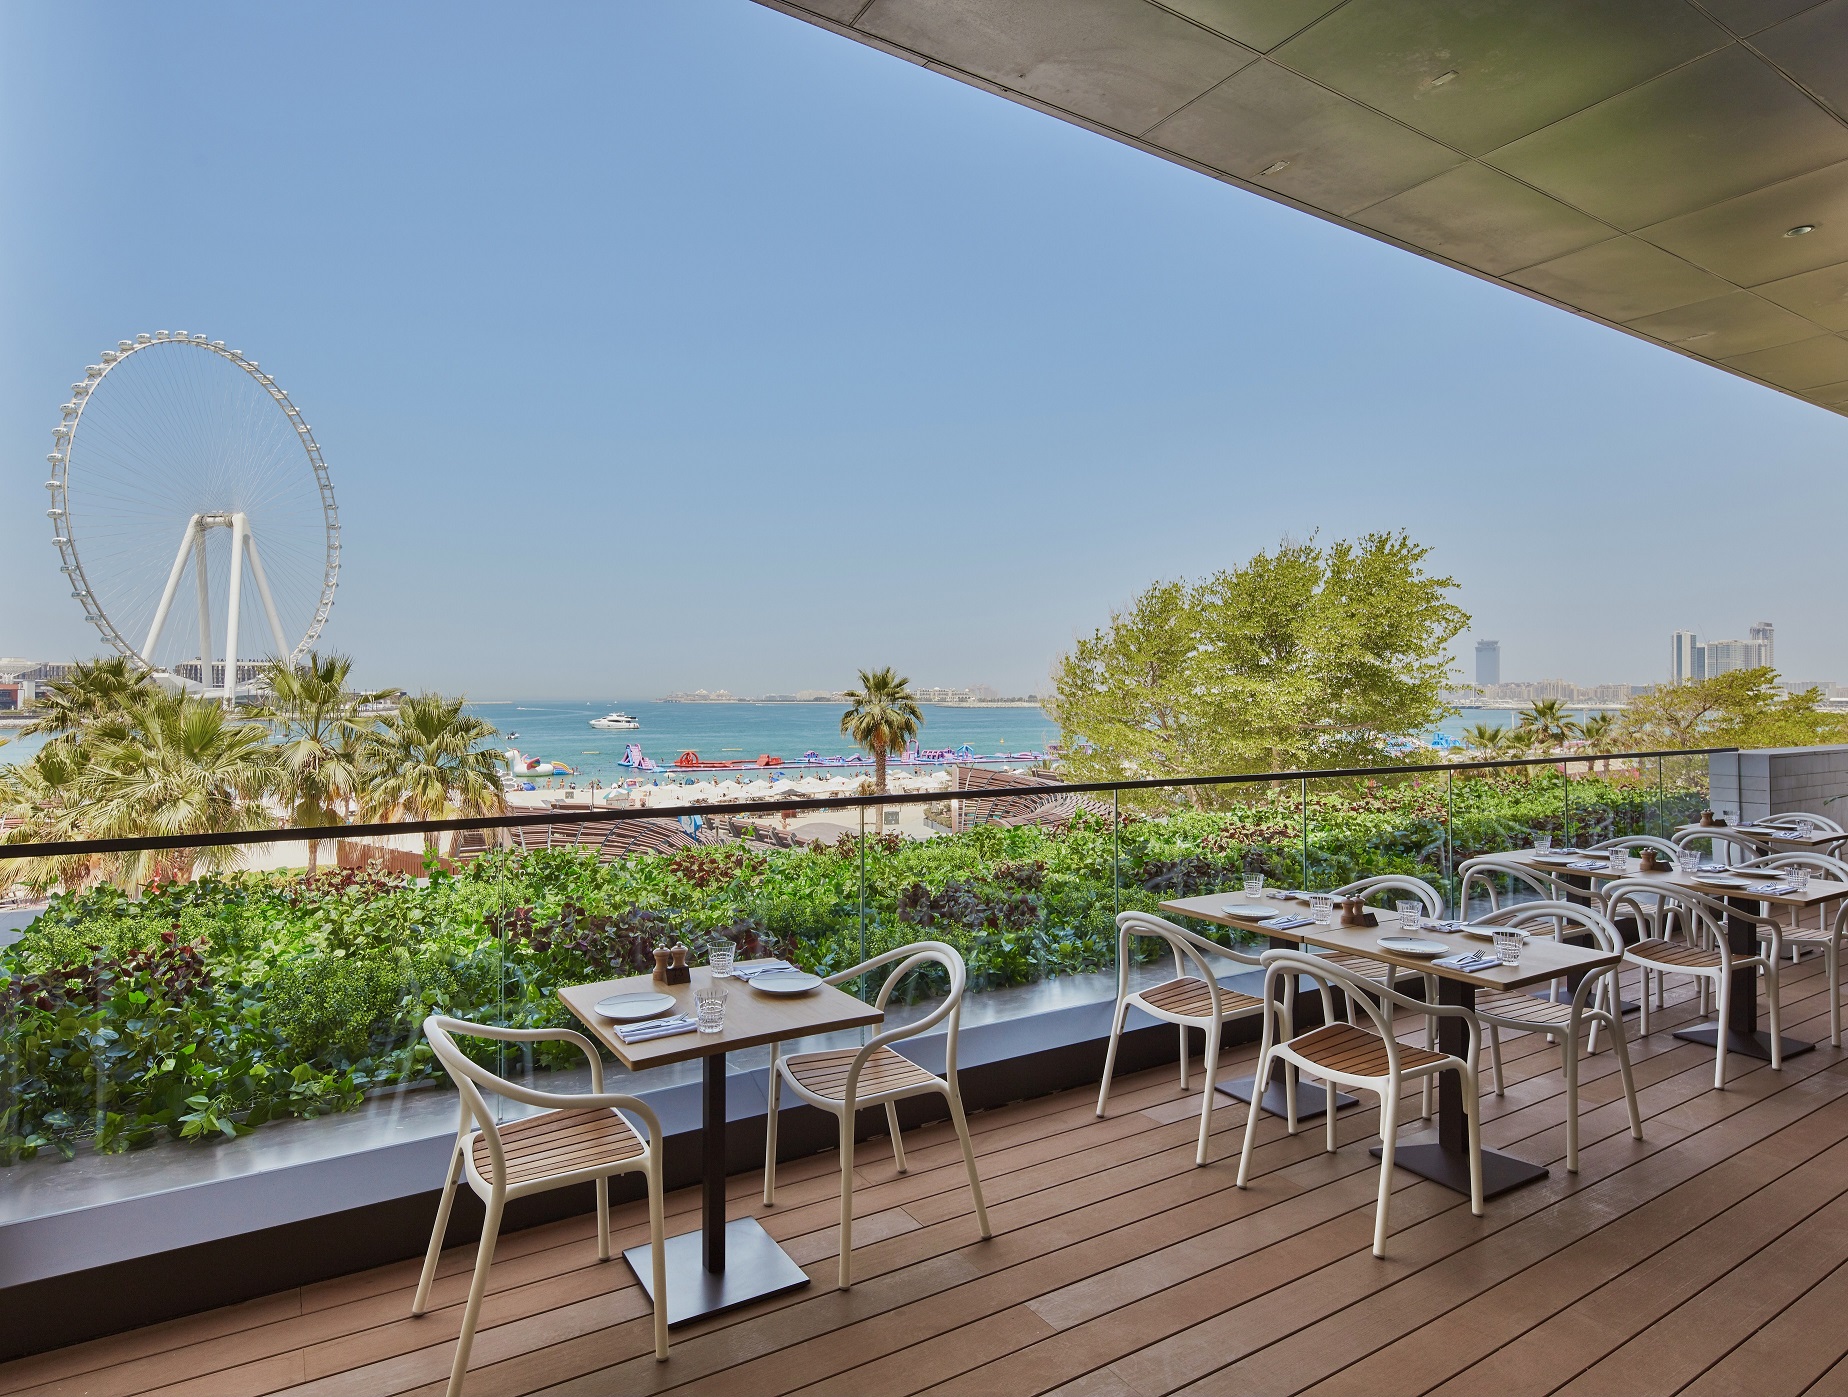 What better way to start than with friends or family while overlooking the beautifully bustling JBR shoreline